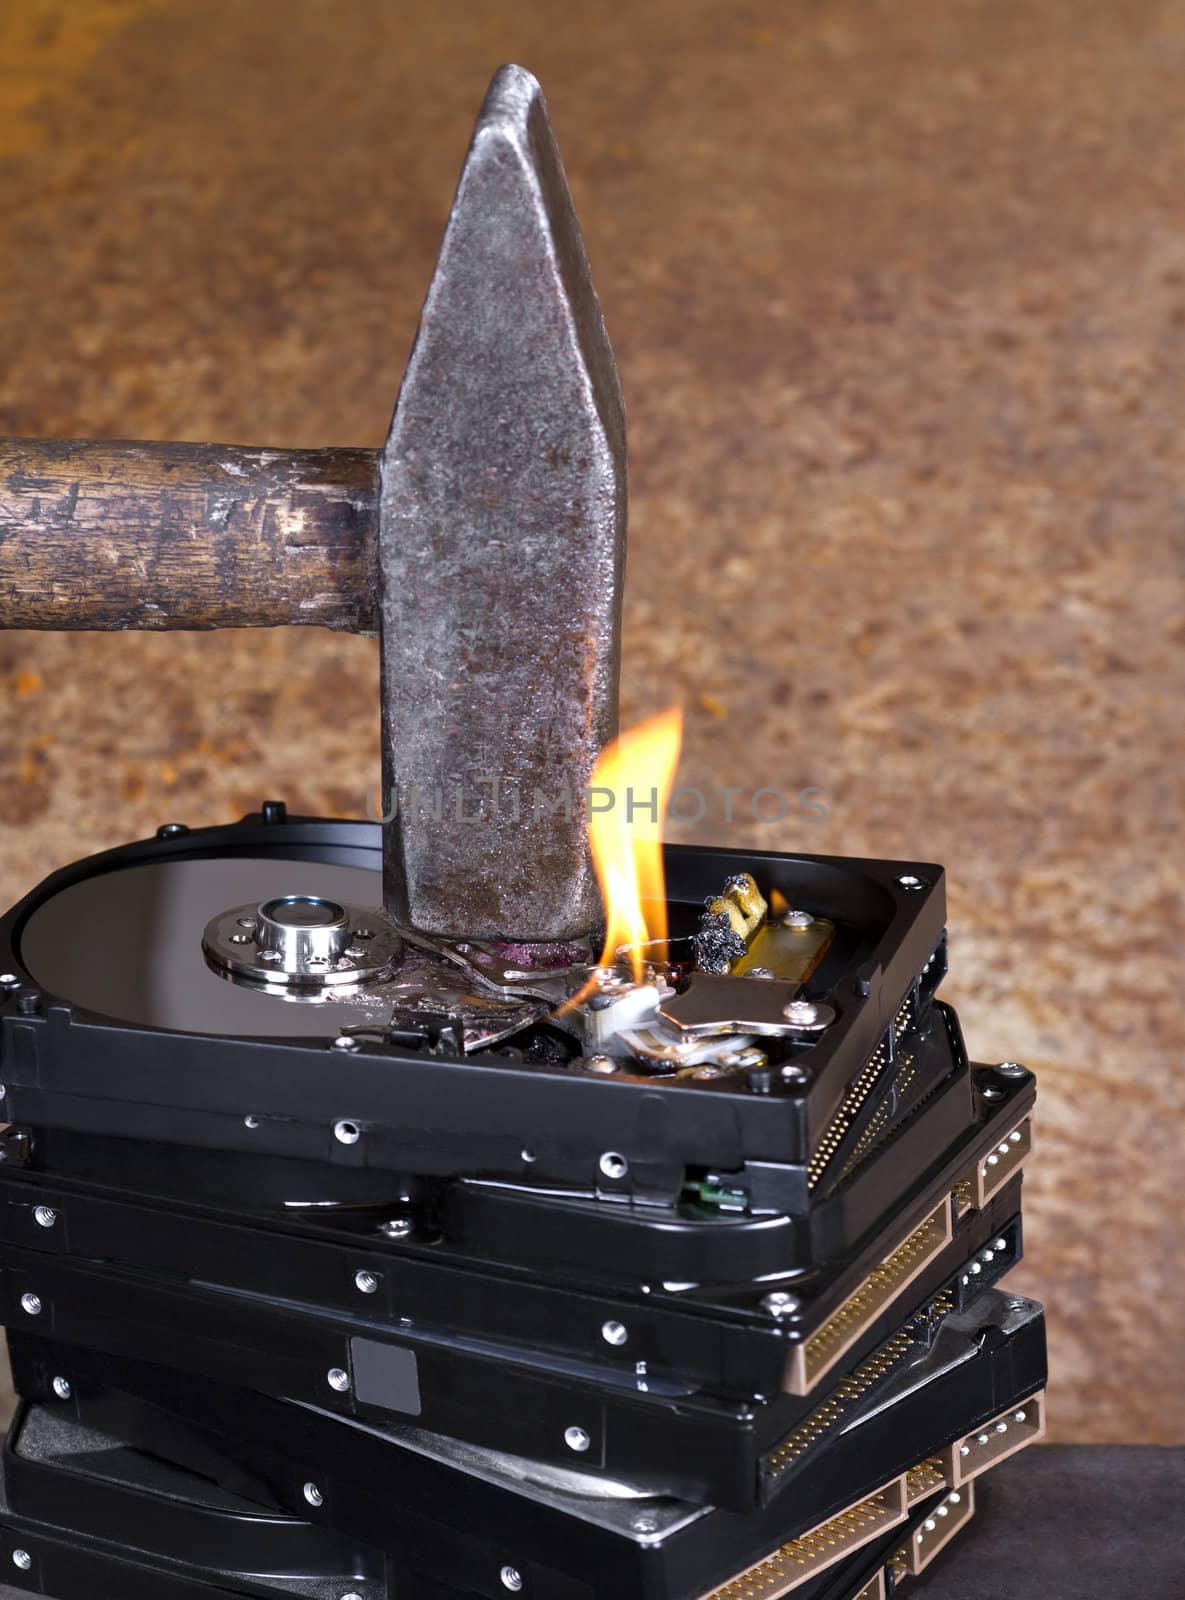 hammer on stack of hard disk by gewoldi